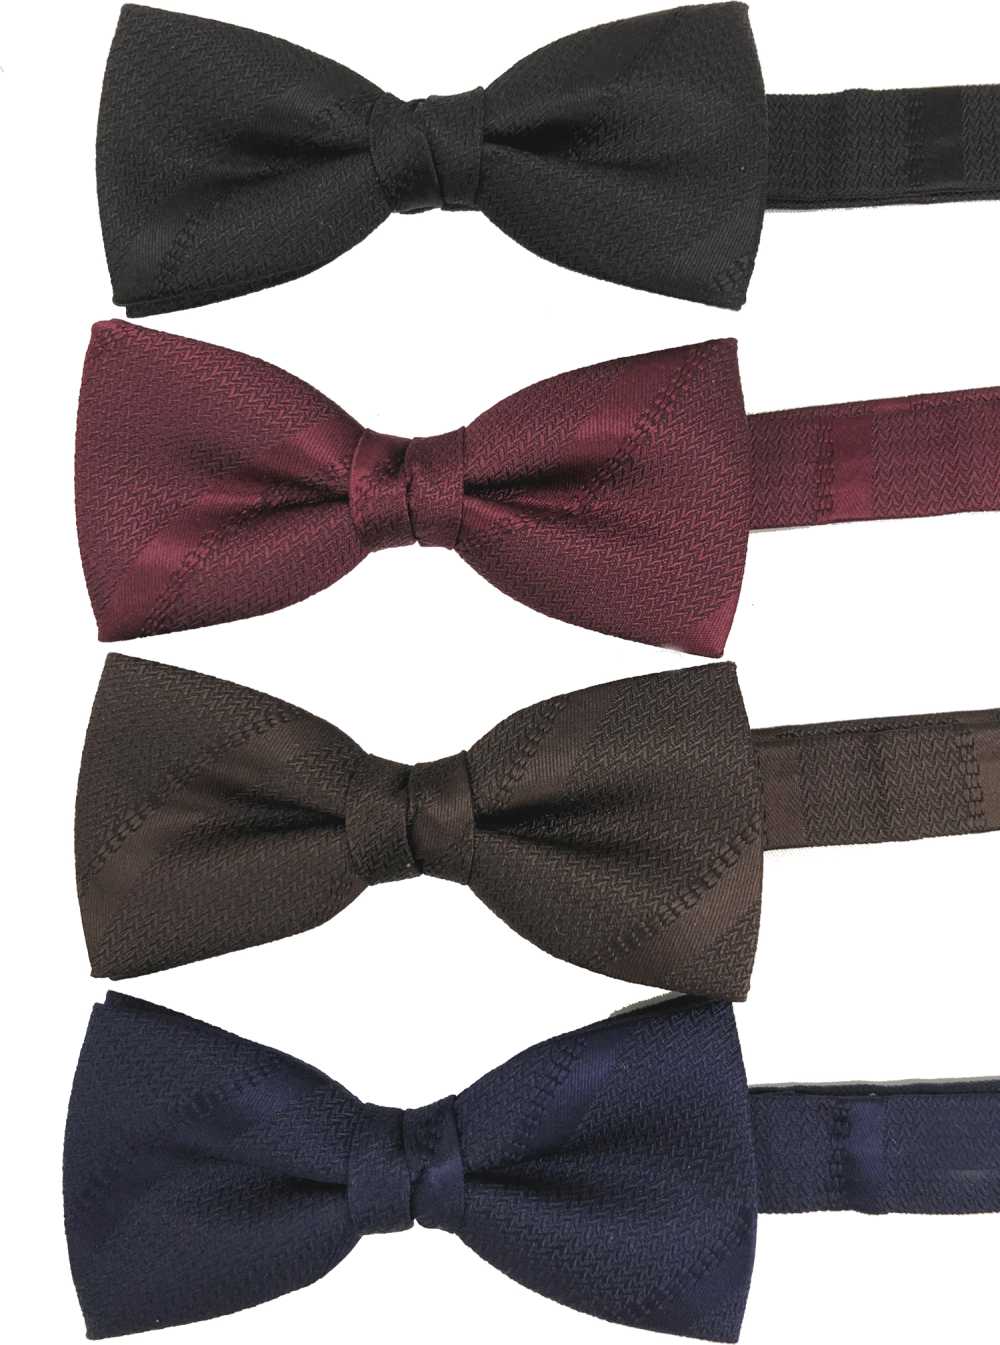 BF-401 Nishijin Woven Striped Bow Tie[Formal Accessories] Yamamoto(EXCY)